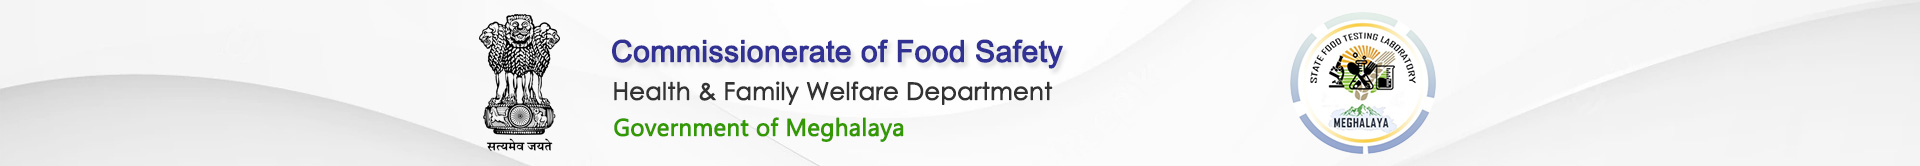 Commissionerate of Food Safety Banner